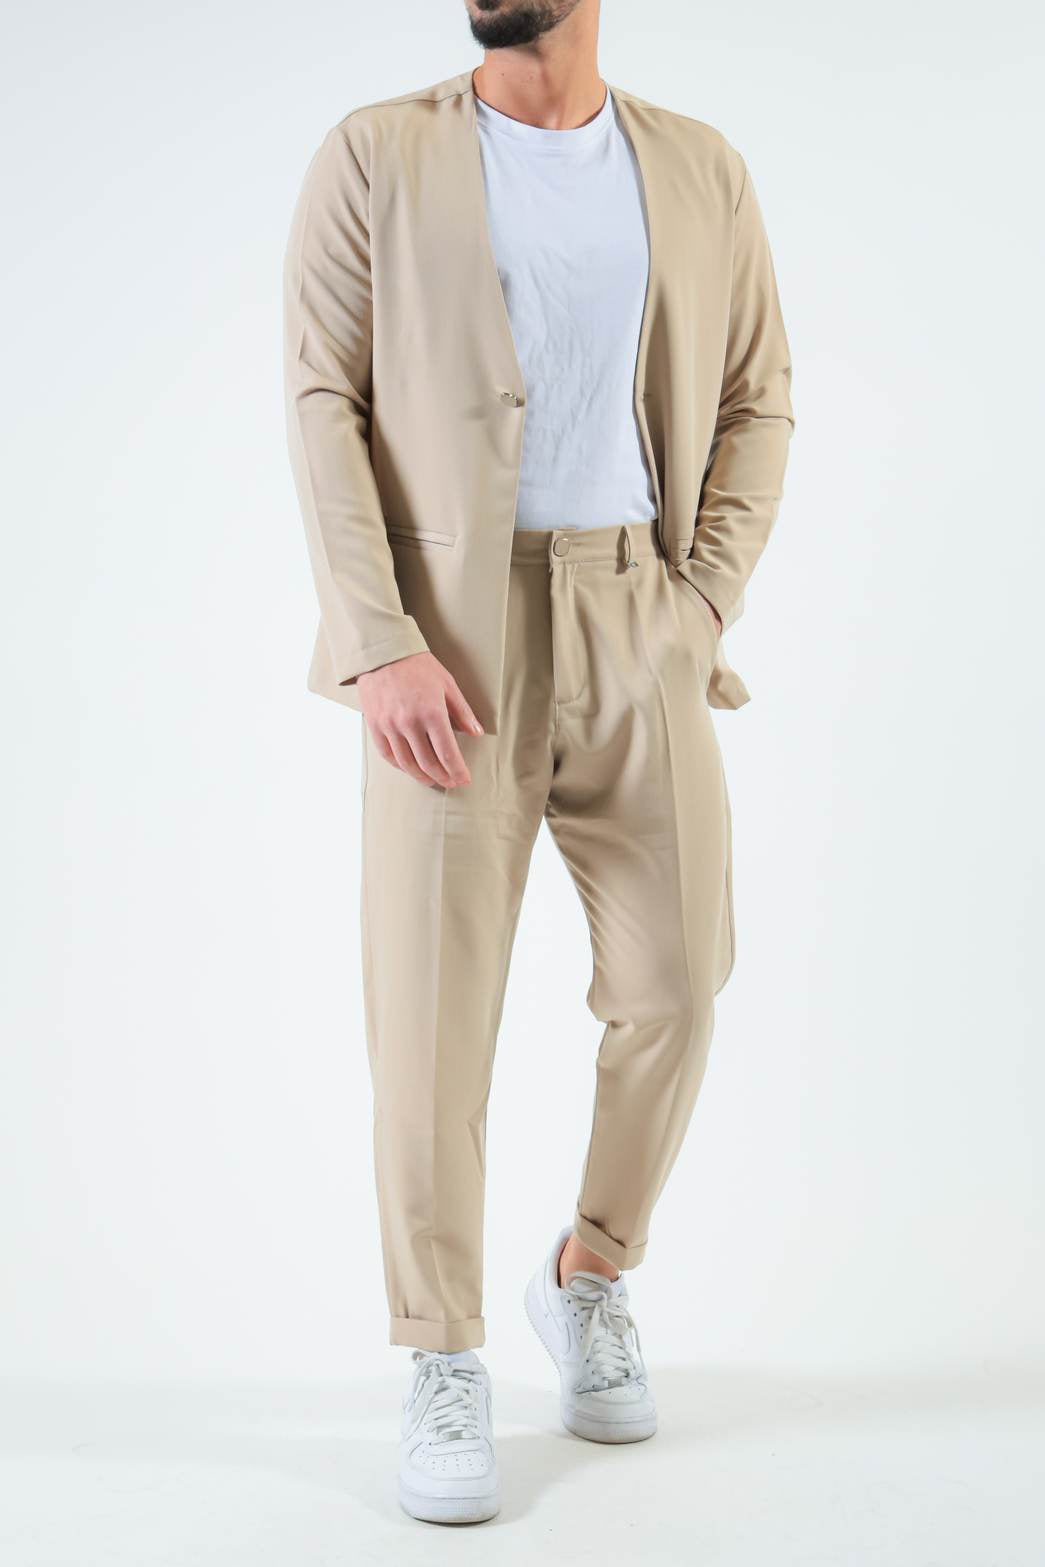 the brothers coordset giacca+pant gioiello